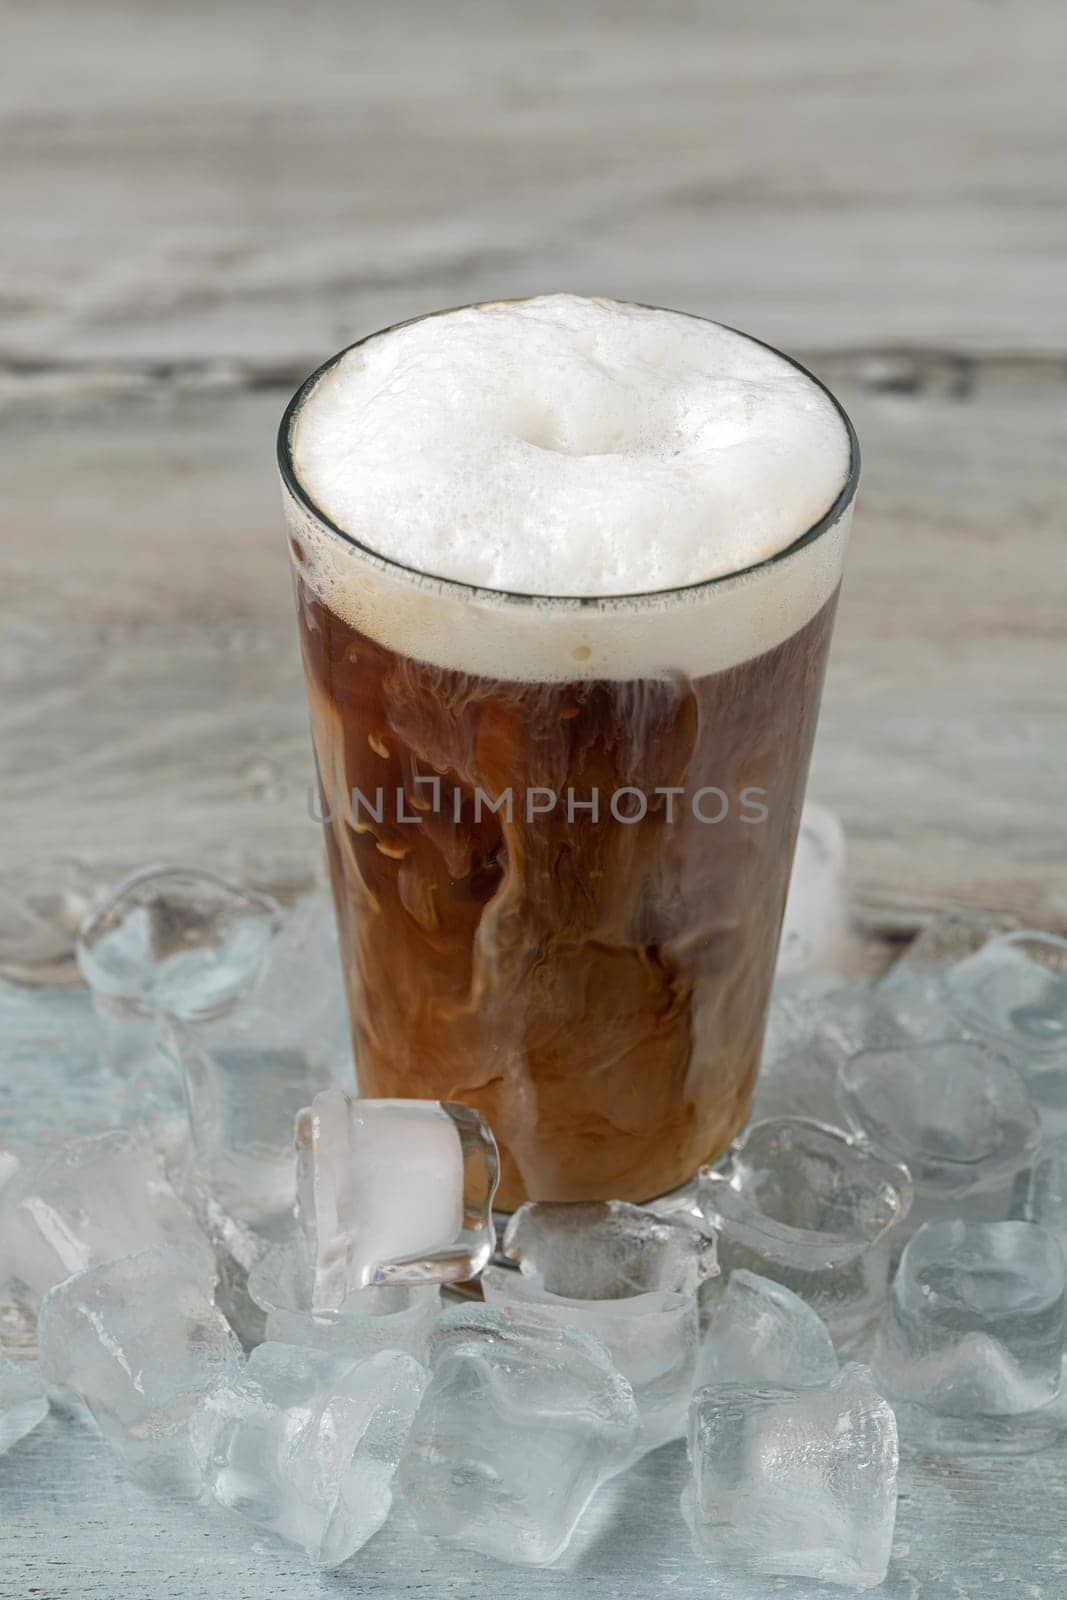 Iced coffee latte in glass cup on wooden table